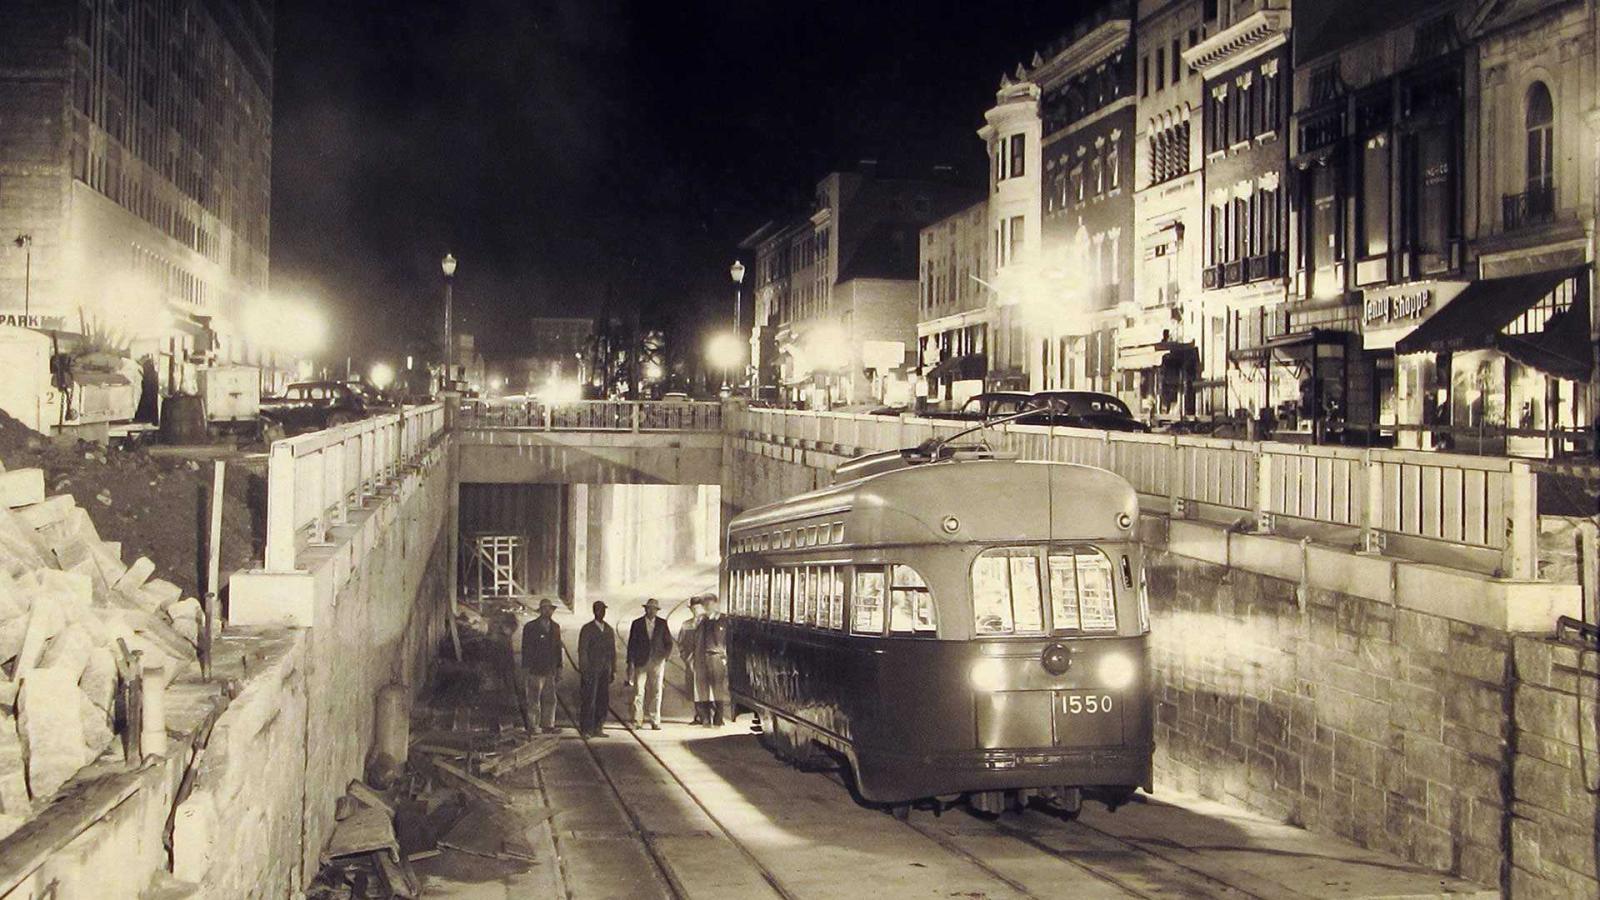 Dupont underground trolley station in 1947